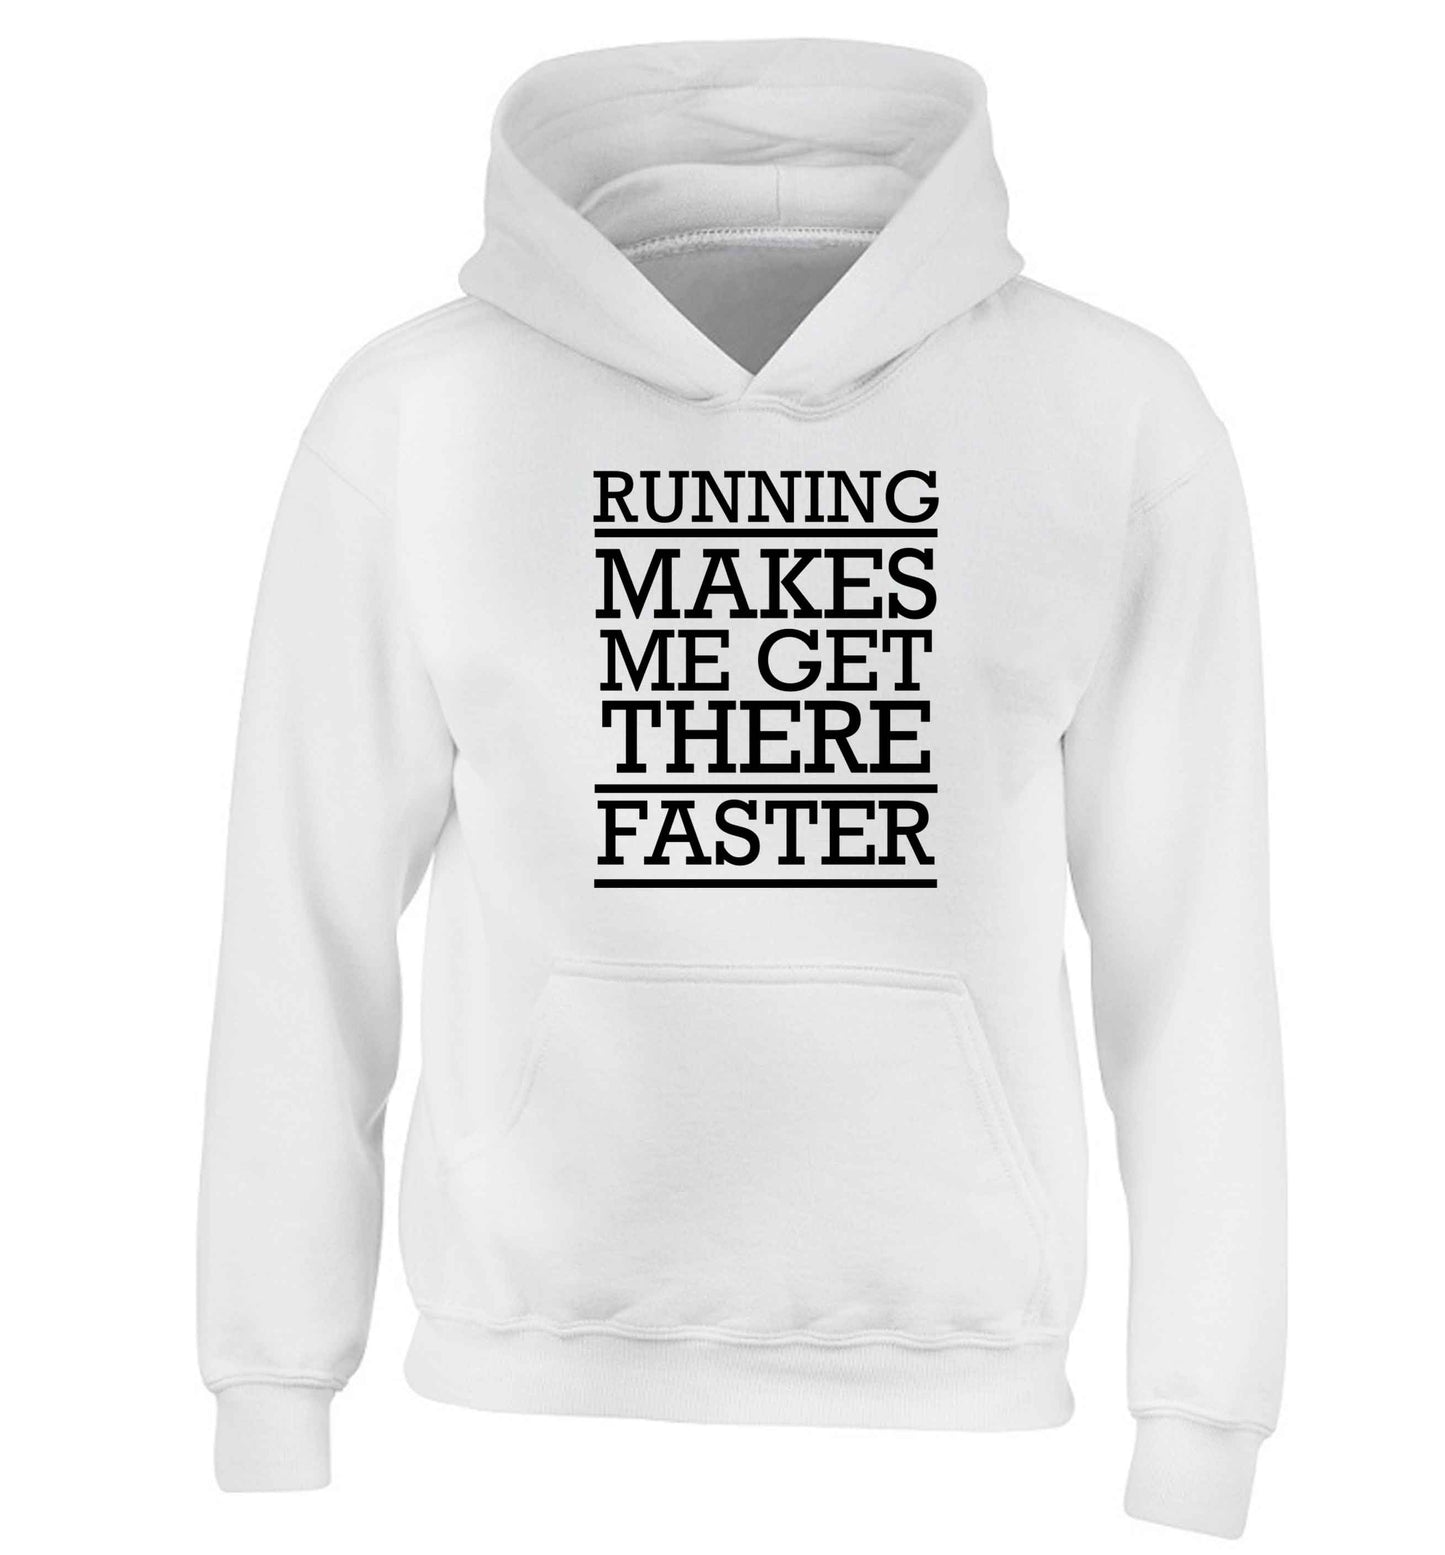 Running makes me get there faster children's white hoodie 12-13 Years